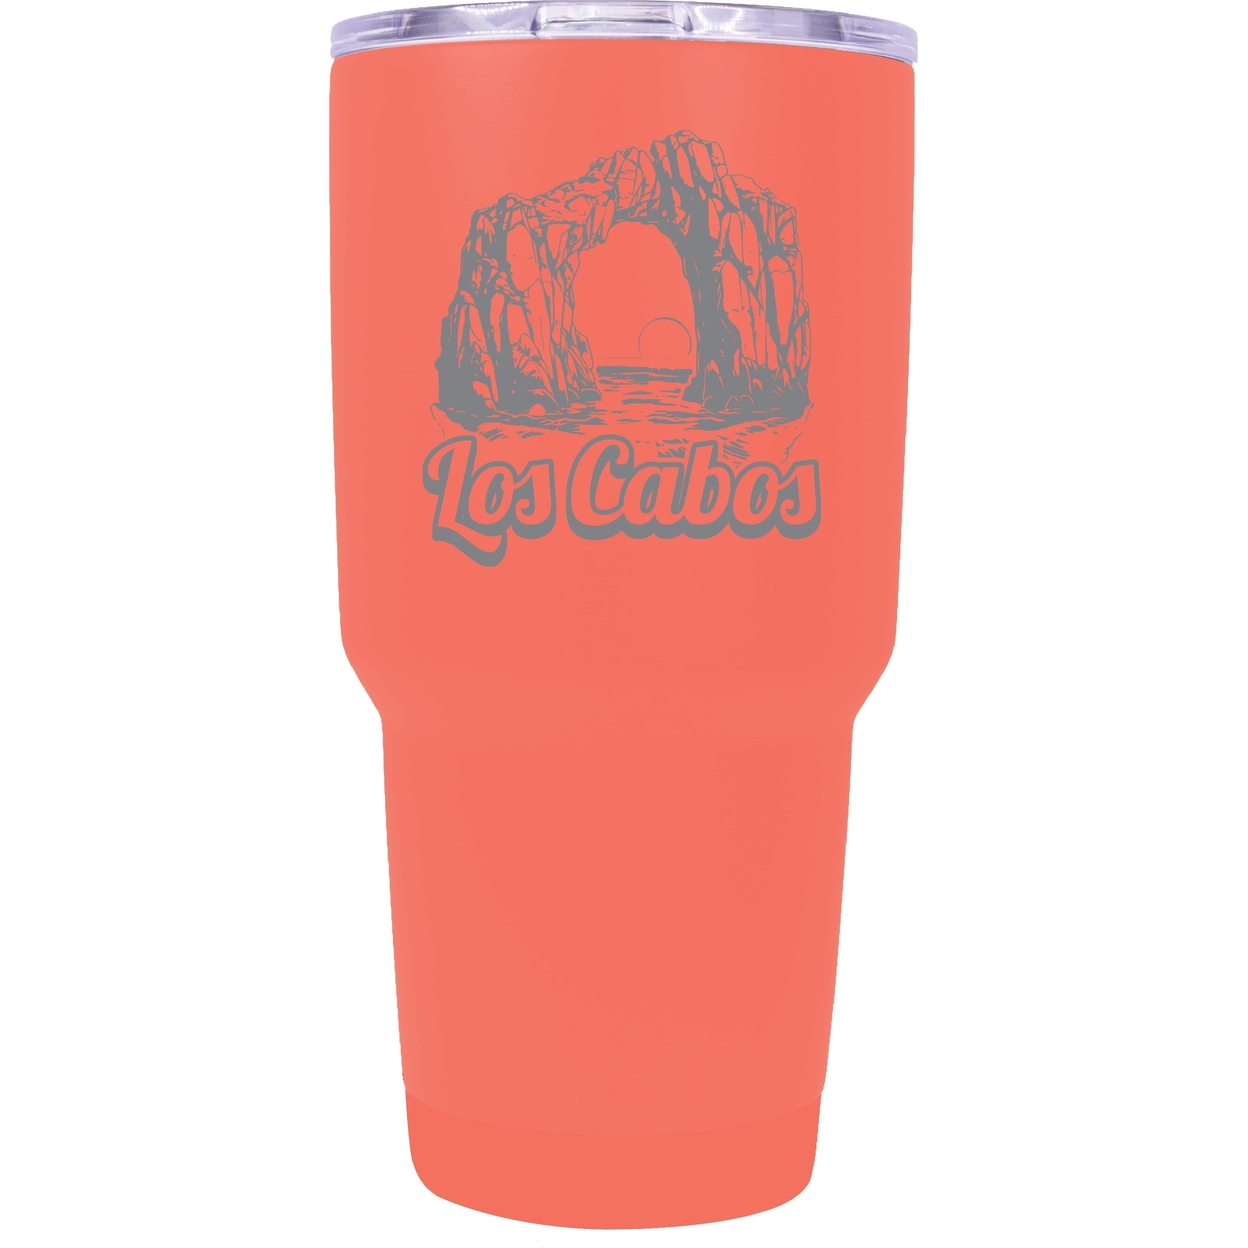 Los Cabos Mexico Souvenir 24 Oz Engraved Insulated Stainless Steel Tumbler - Coral,,2-Pack